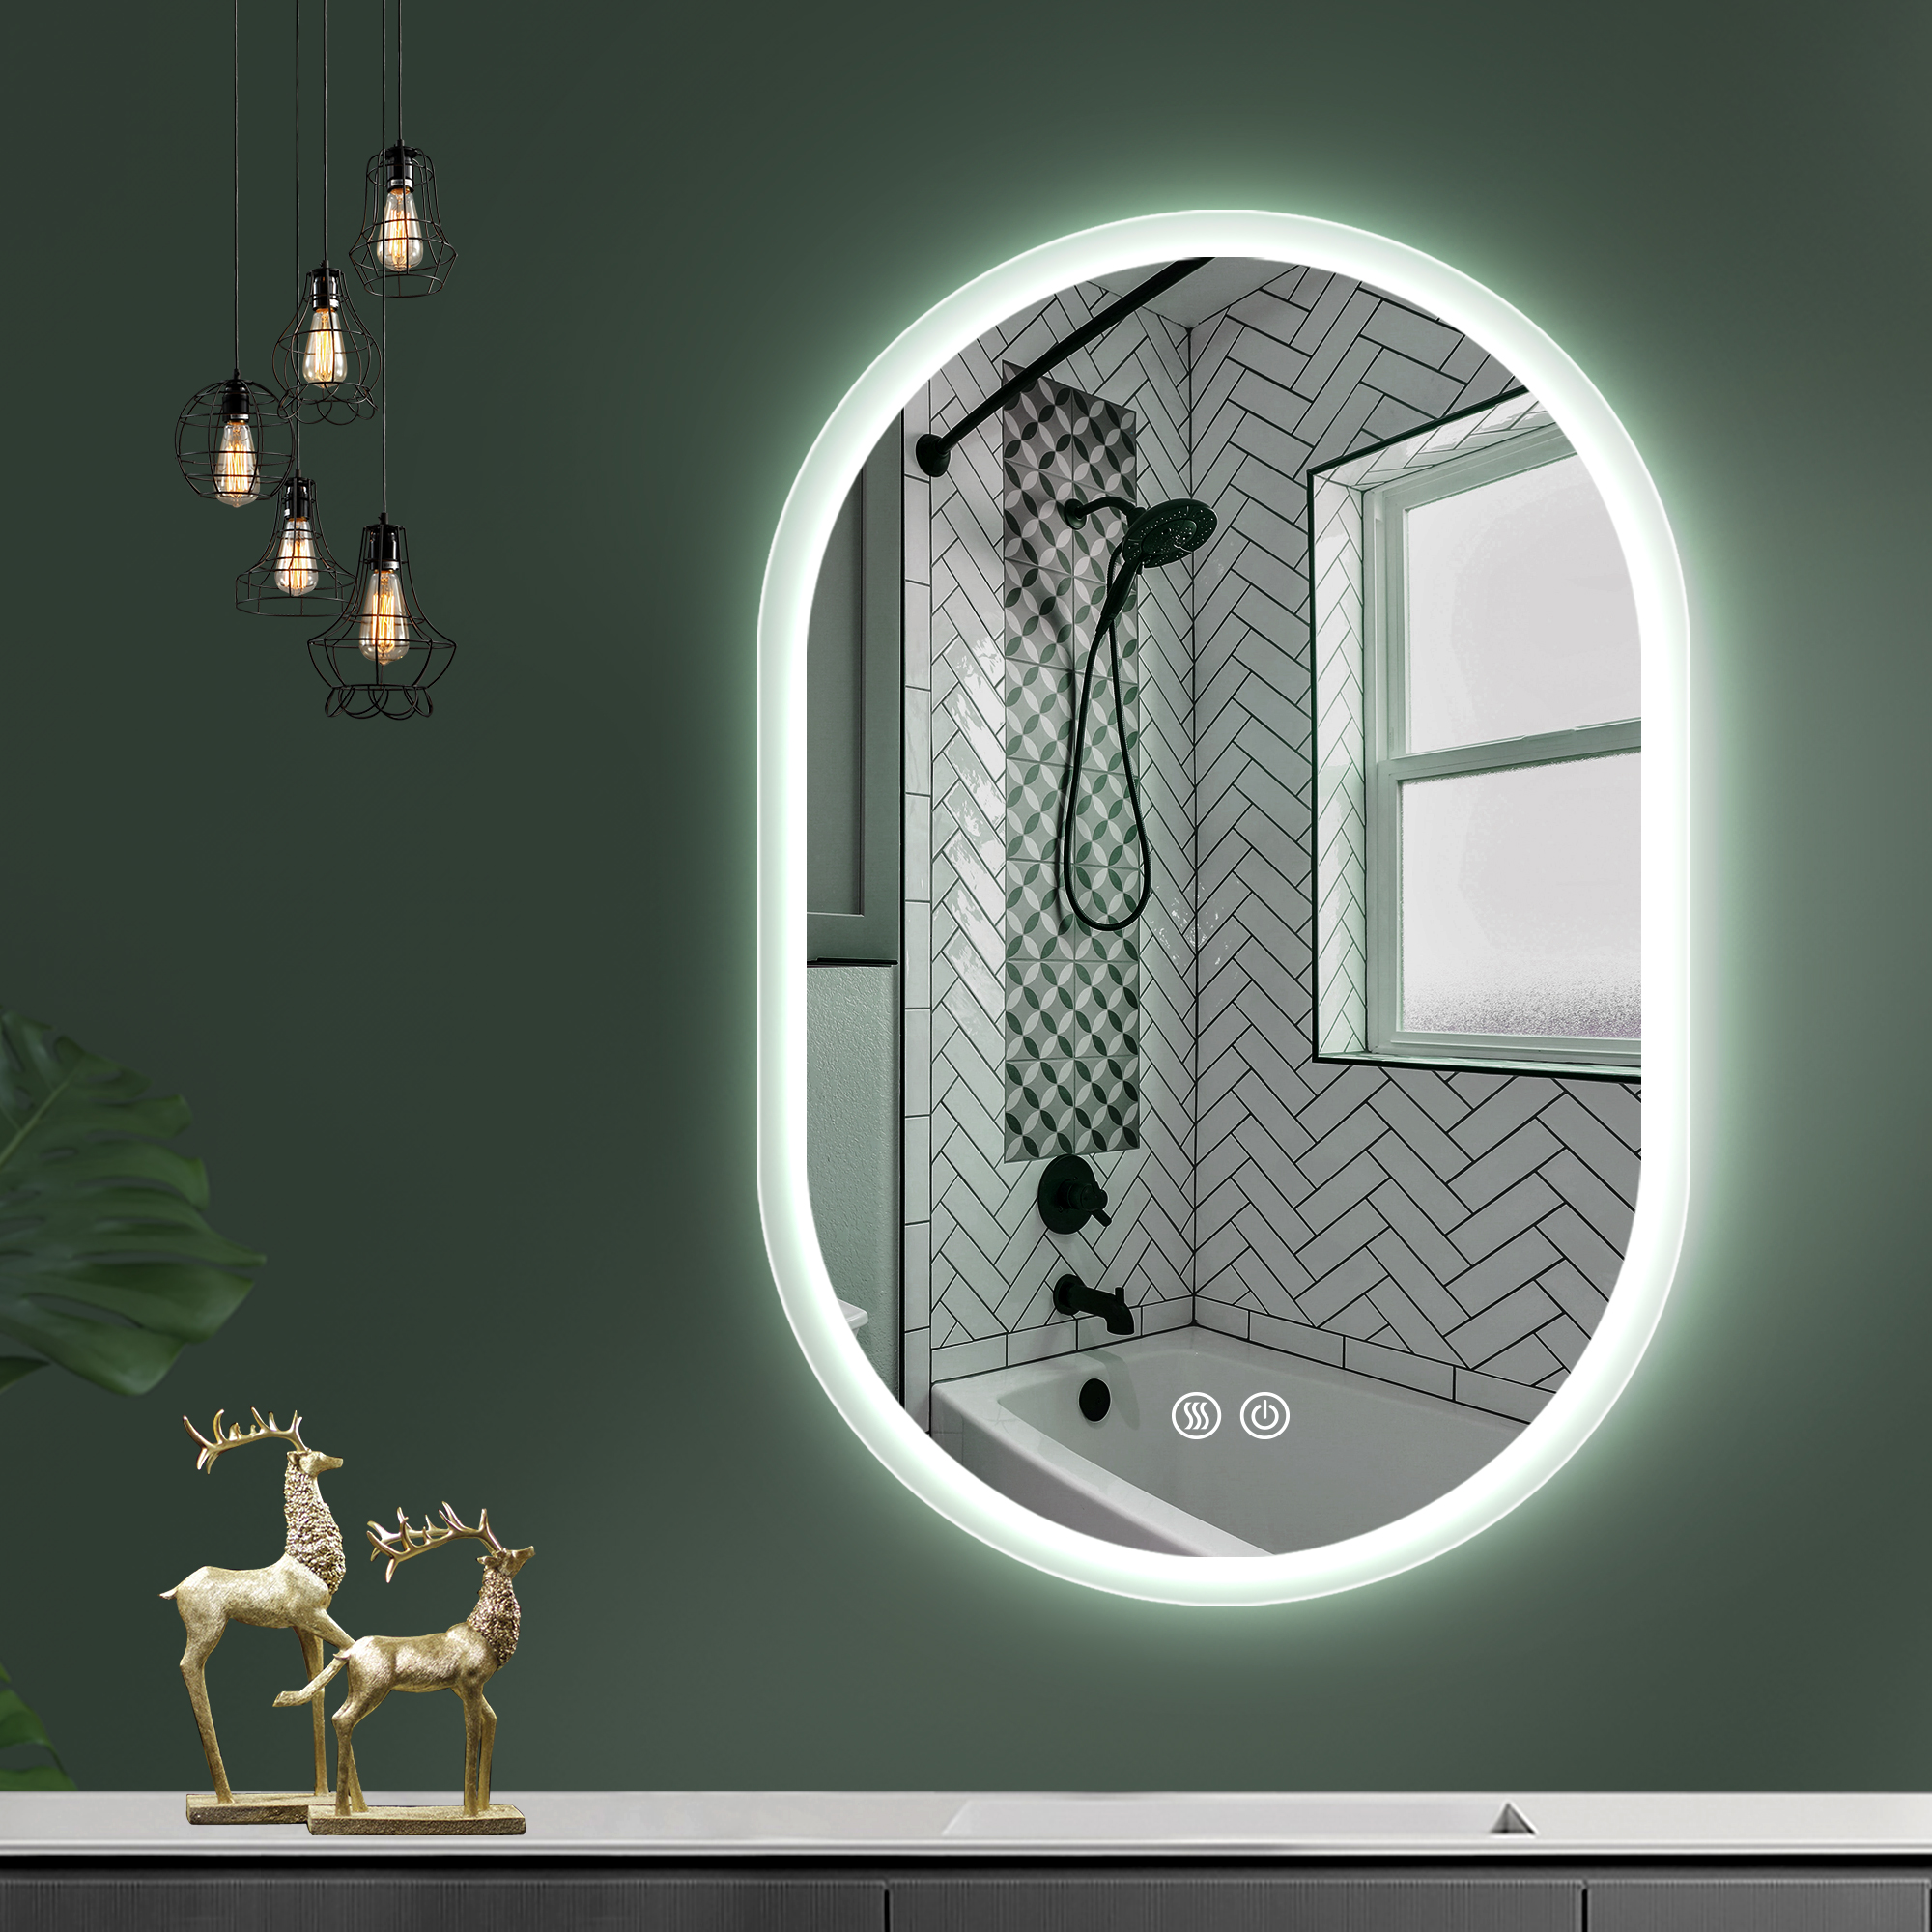 32X20 Inch Bathroom Mirror with Lights, Anti Fog Dimmable LED Mirror for Wall Touch Control, Frameless Oval Smart Vanity Mirror Vertical Hanging-CASAINC